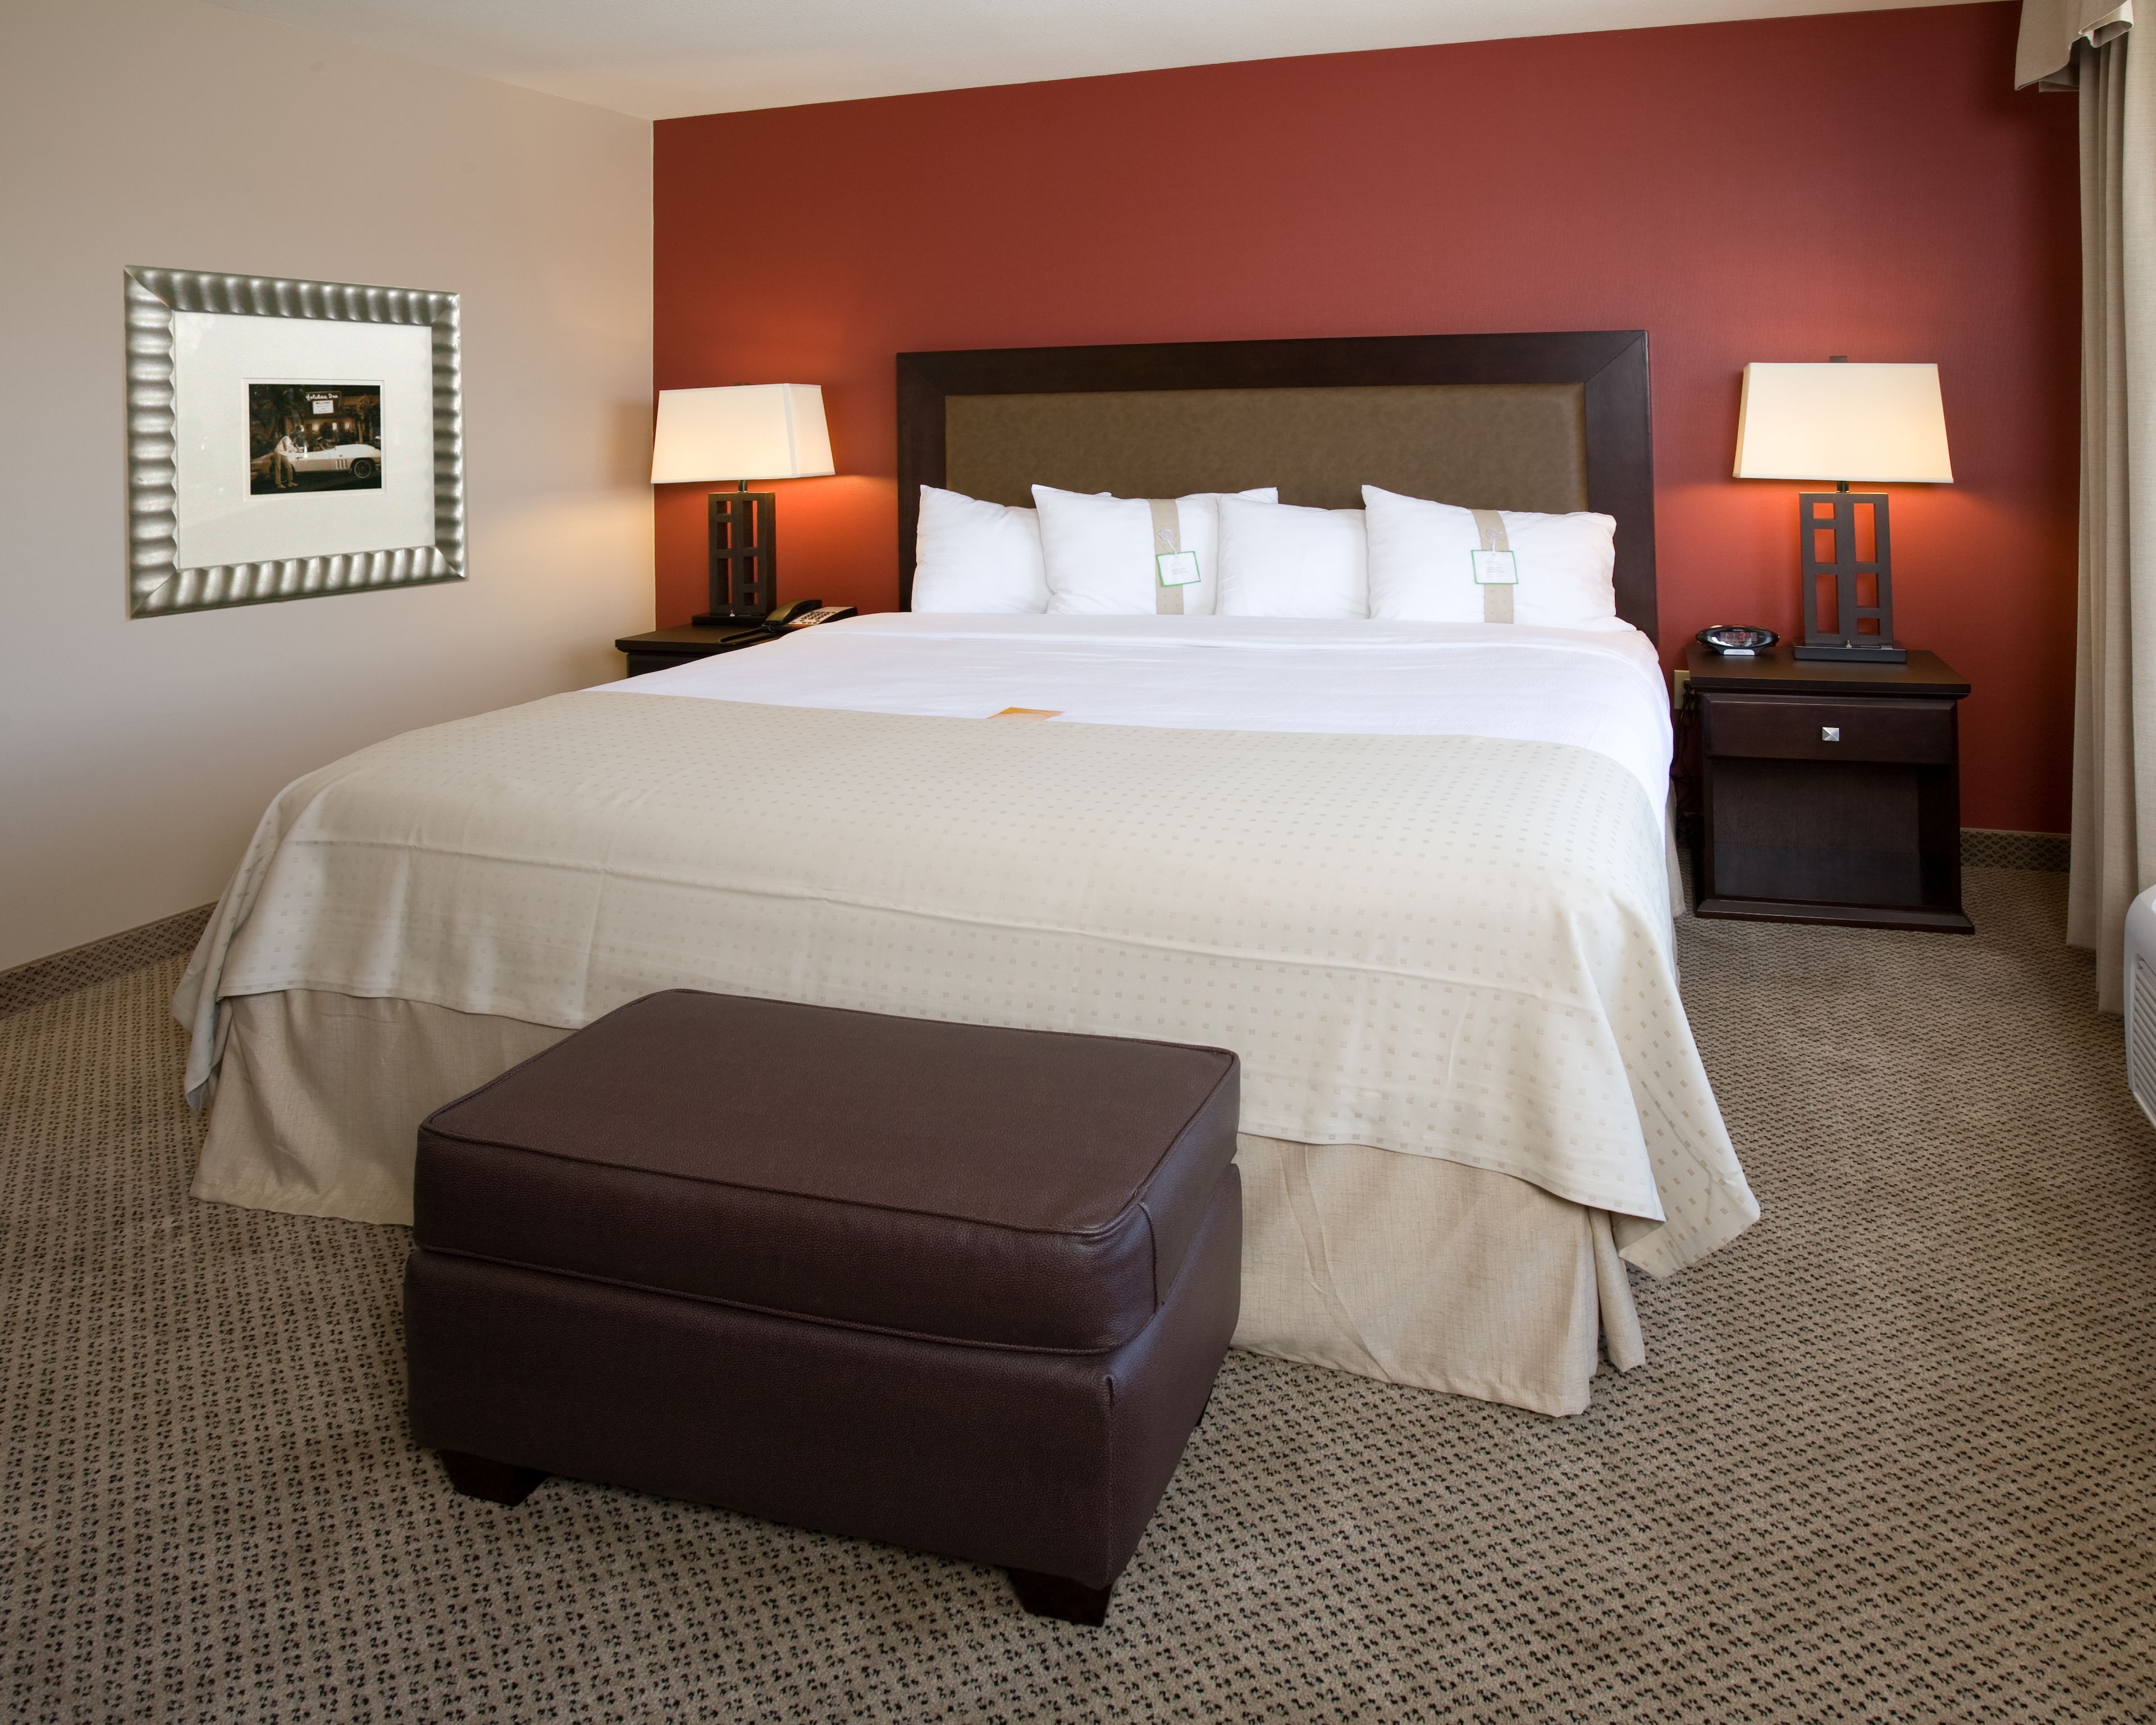 Holiday Inn Hotel & Suites Bakersfield North